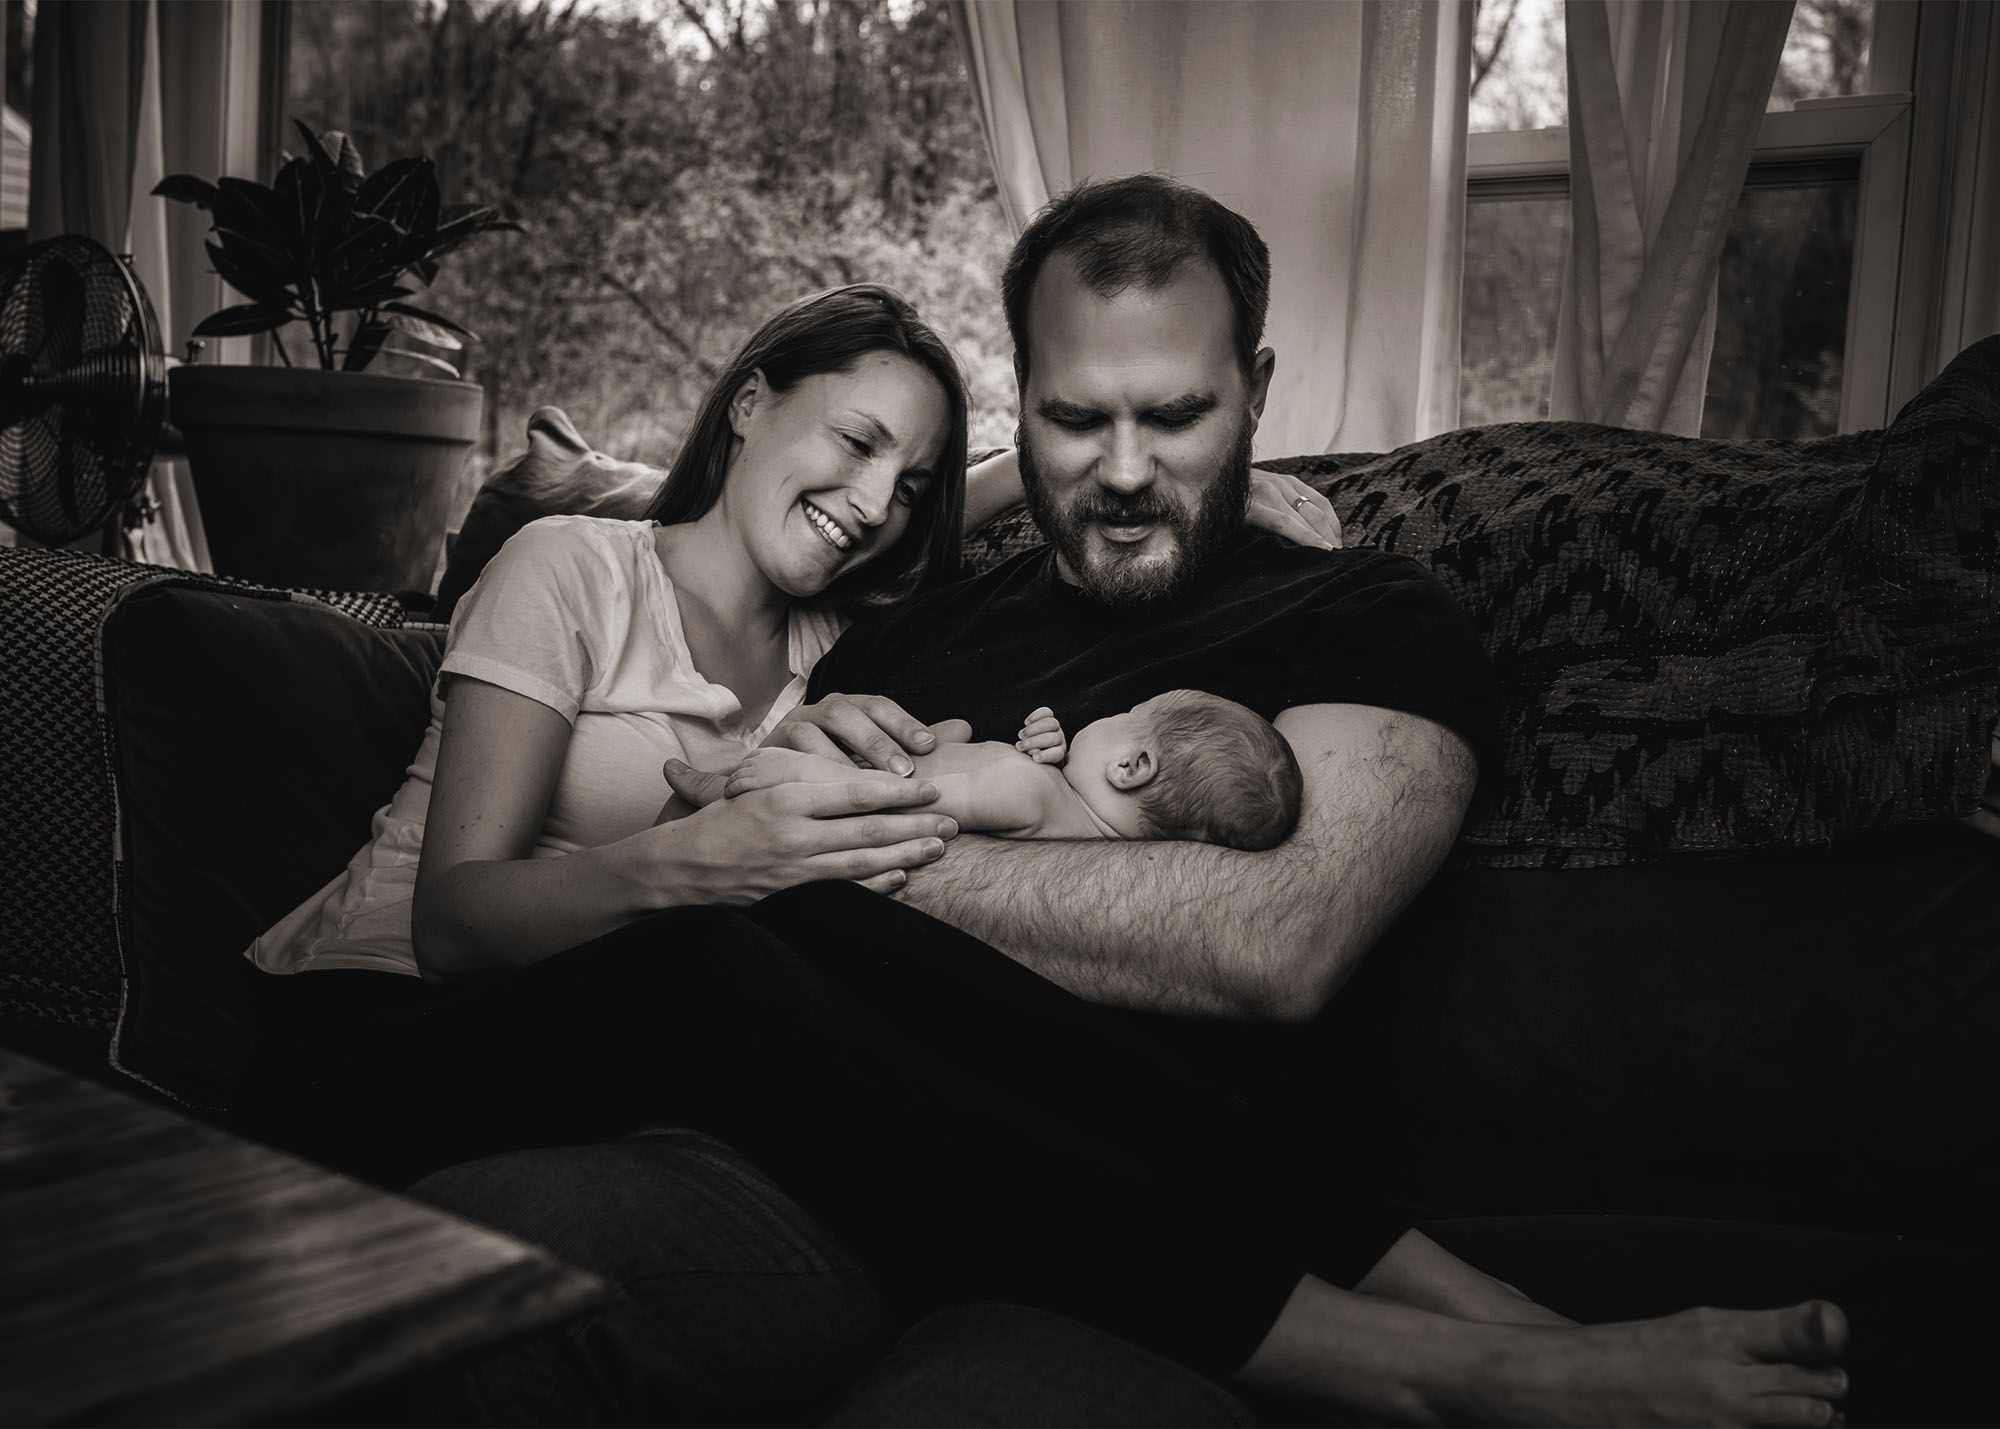 Dad holds newborn on the couch with Mama smiling and looking on Glastonbury CT Newborn Photographer One Big Happy Photo www.onebighappyphoto.com/newborns